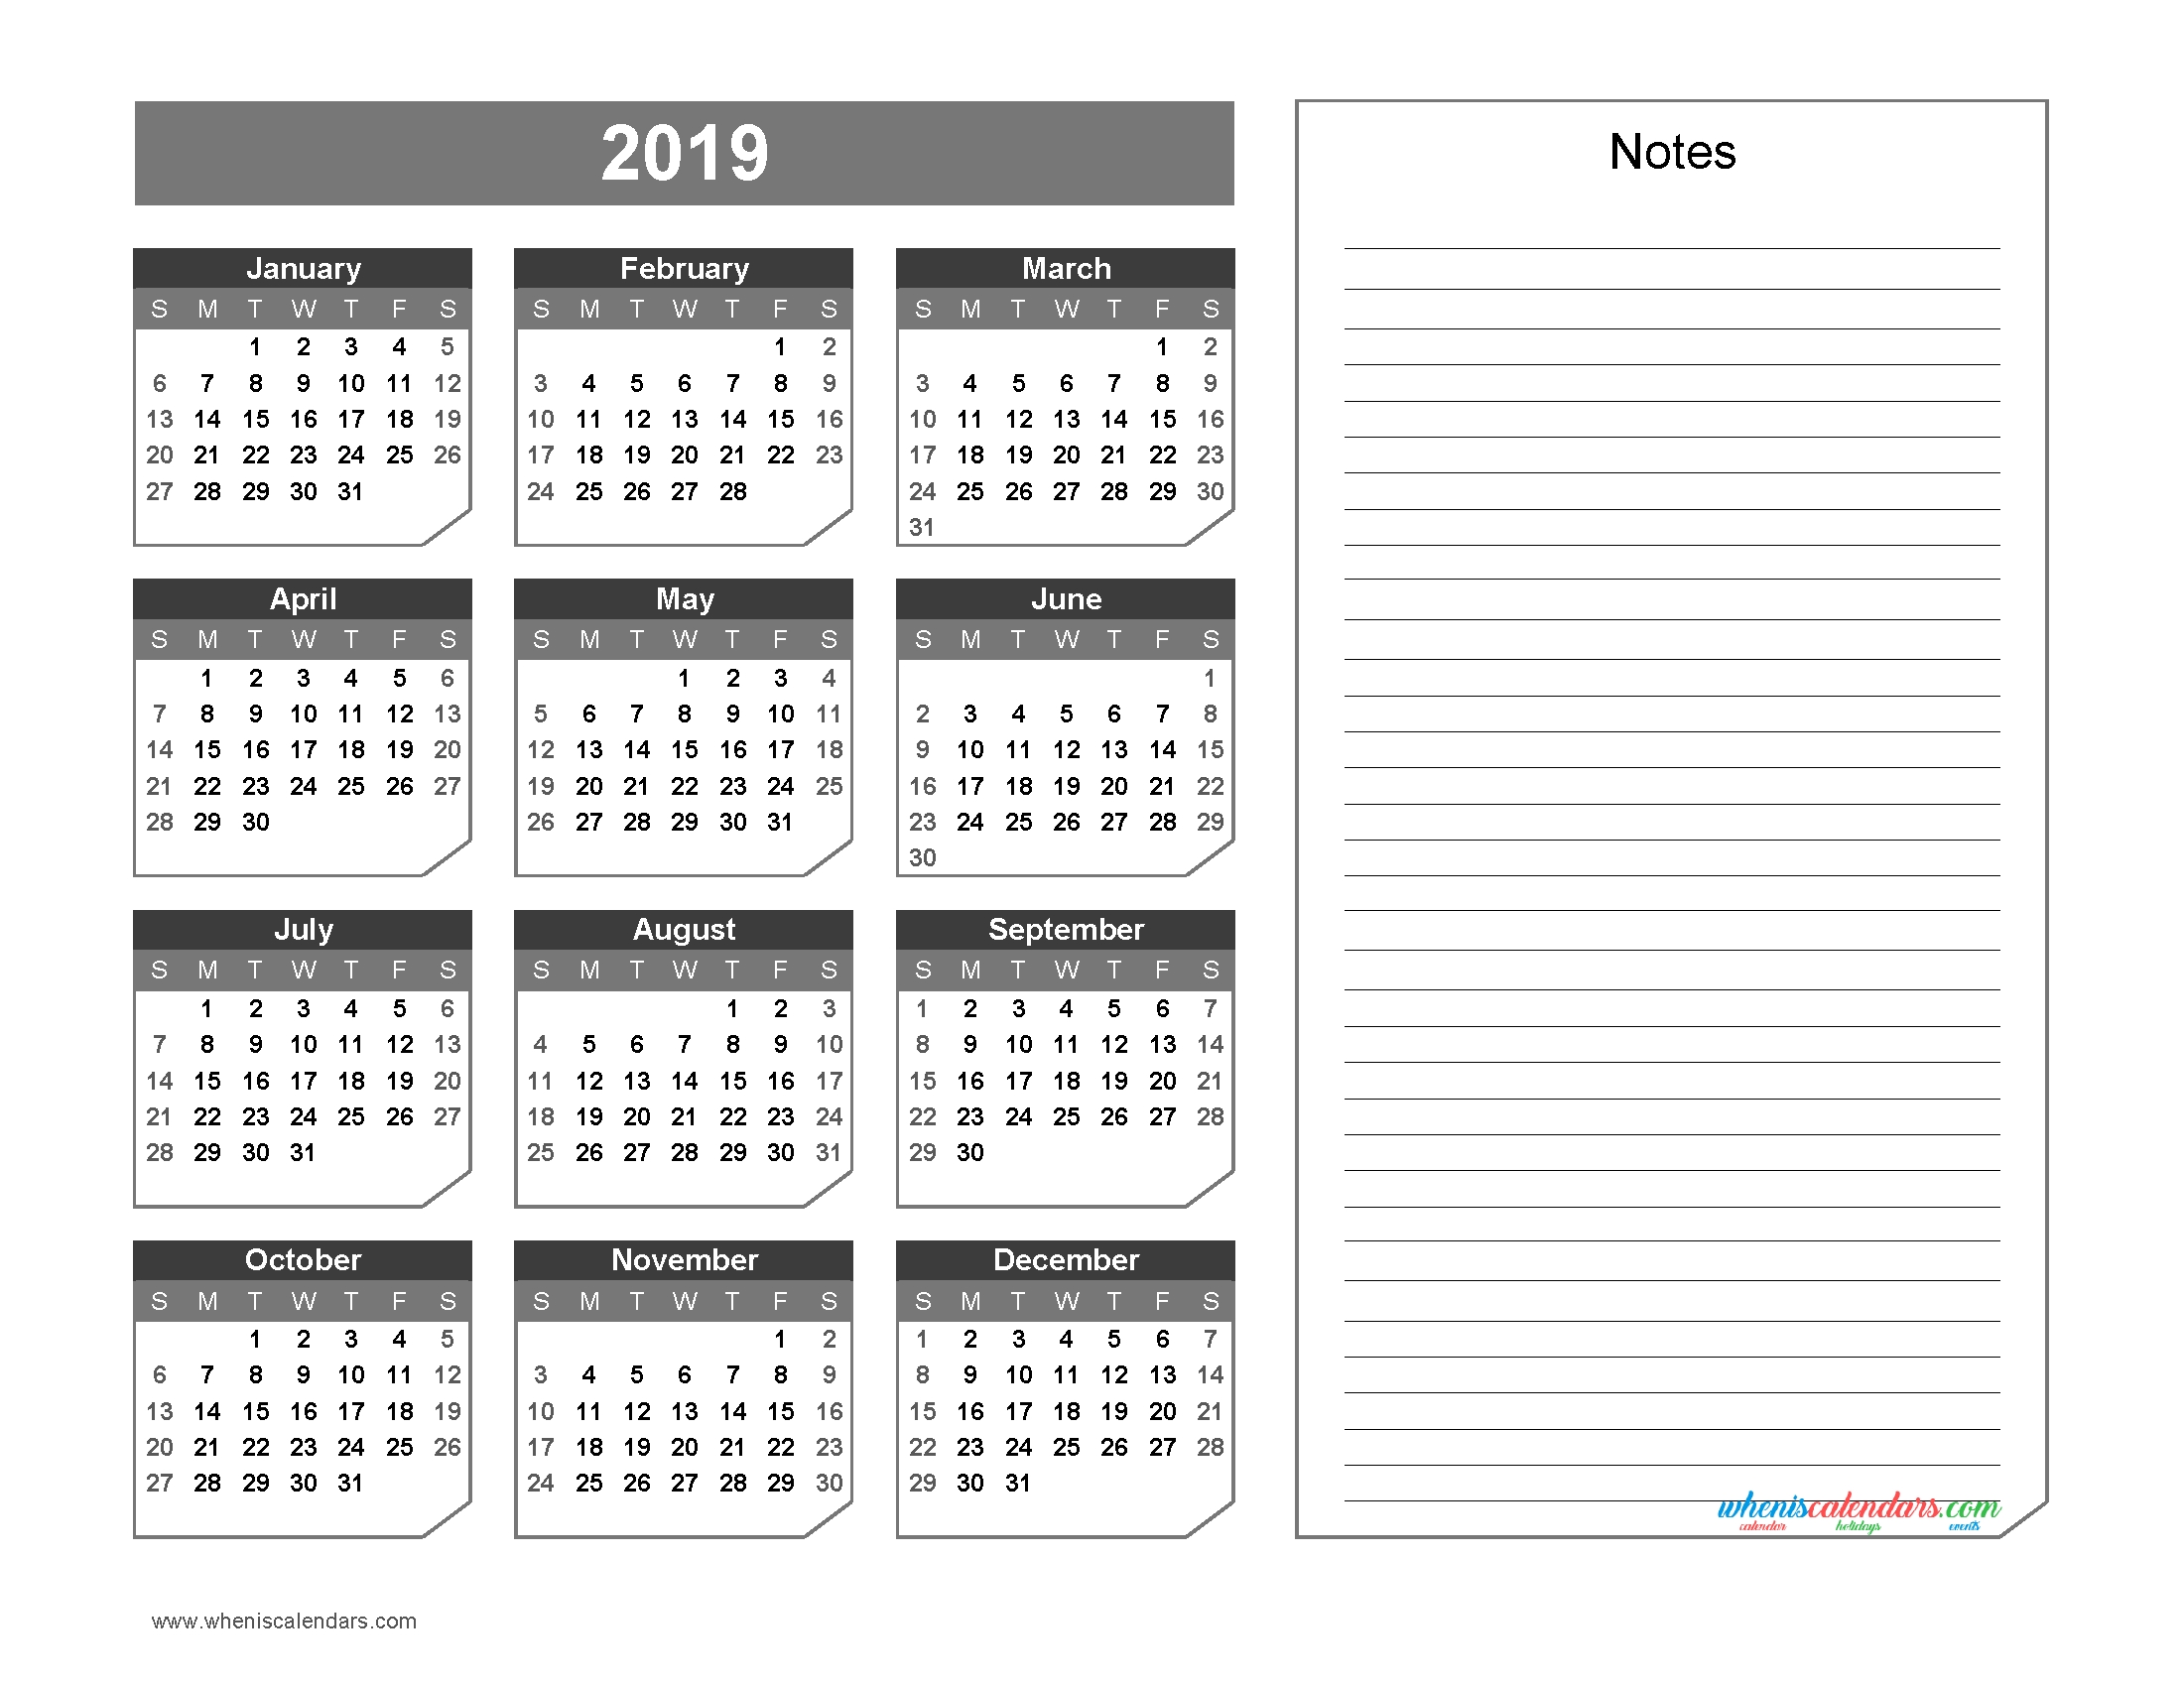 2019 Yearly Calendar With Notes Printable Chamfer Collection